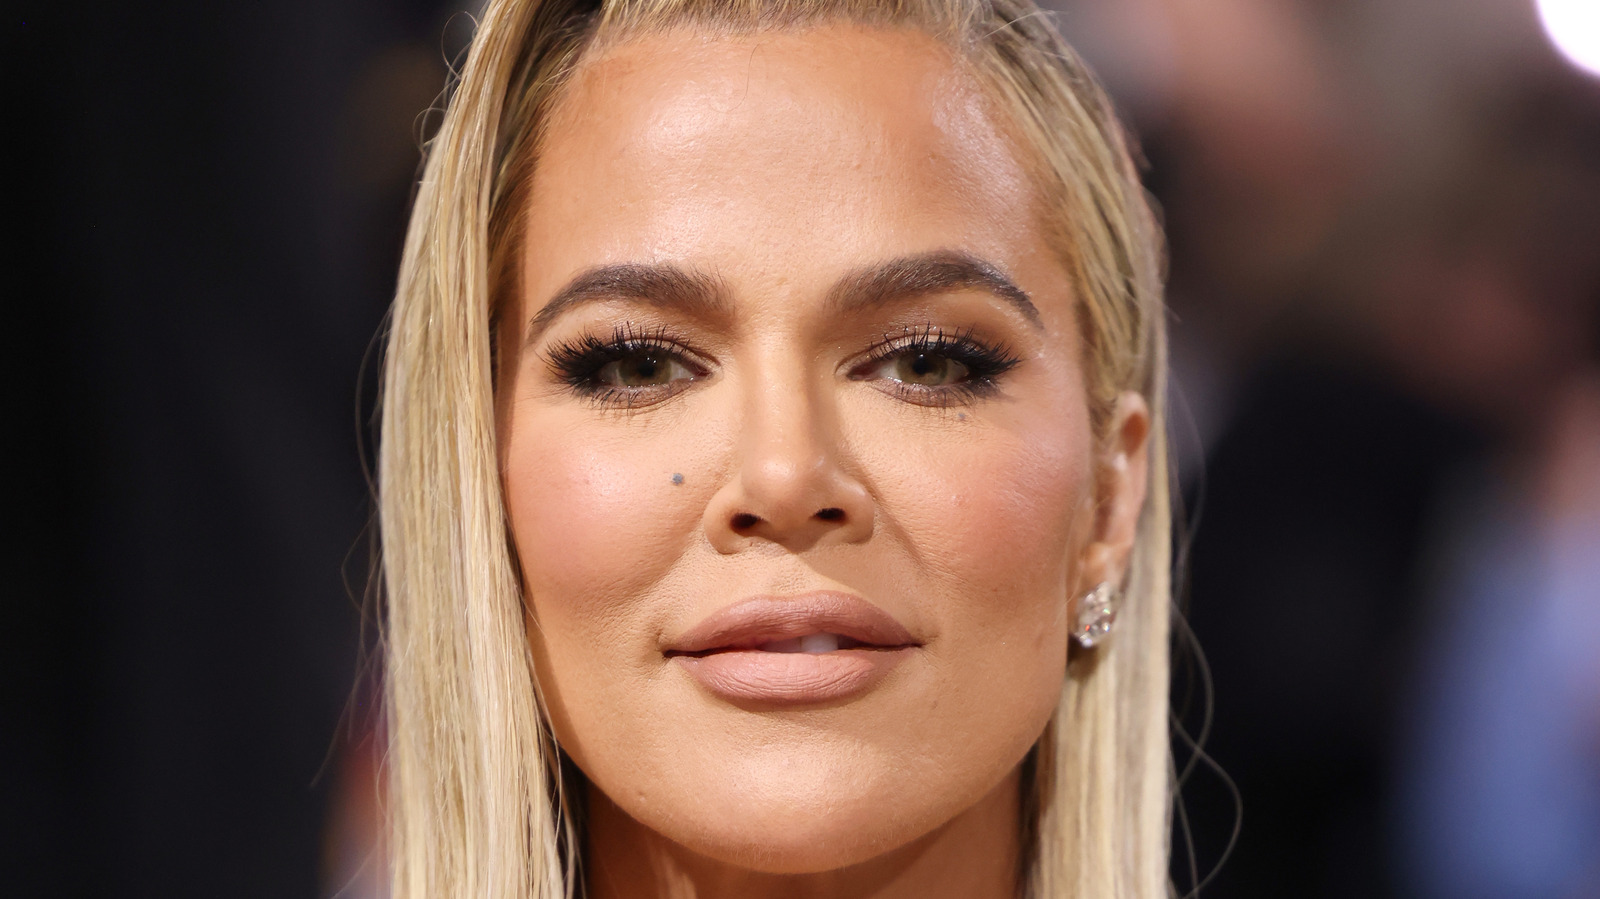 Why Khloé Kardashian S Latest Post Had Fans Convinced She D Started An Onlyfans Account Celeb 99